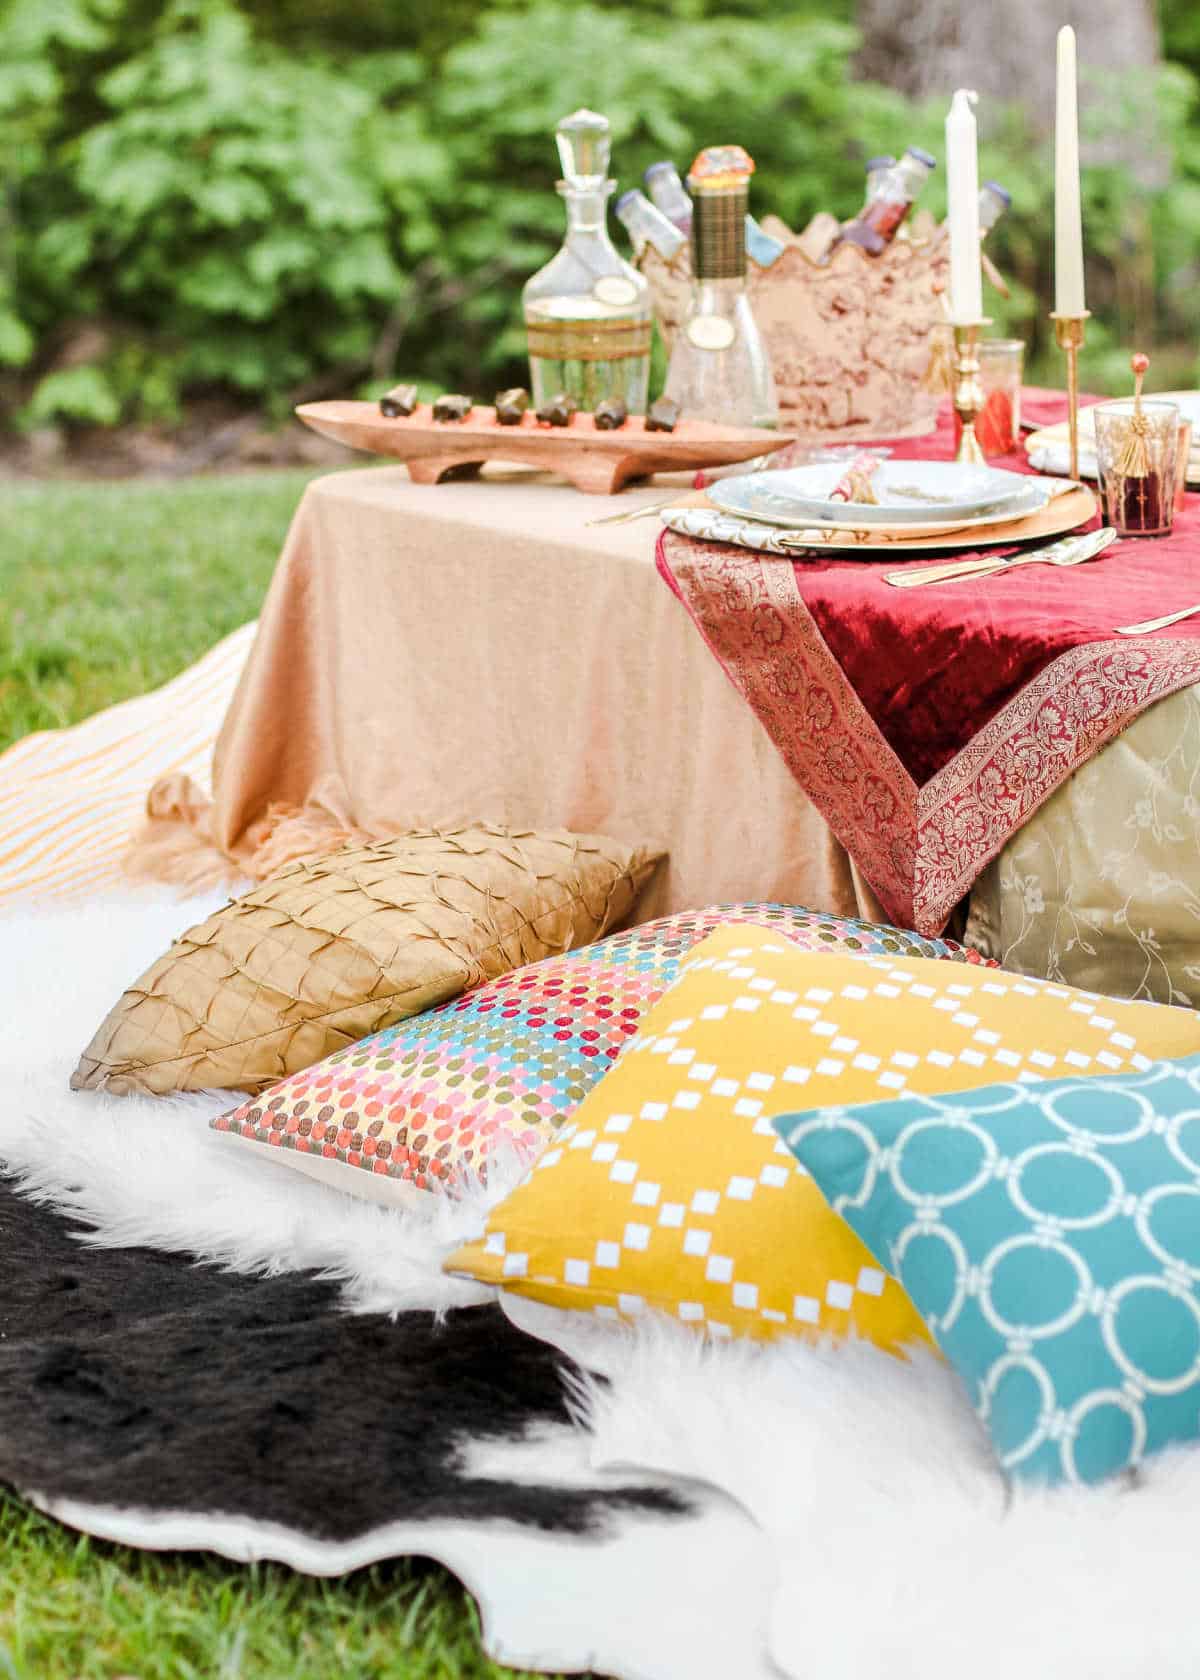 low party table outside with rugs and pillows to sit on.